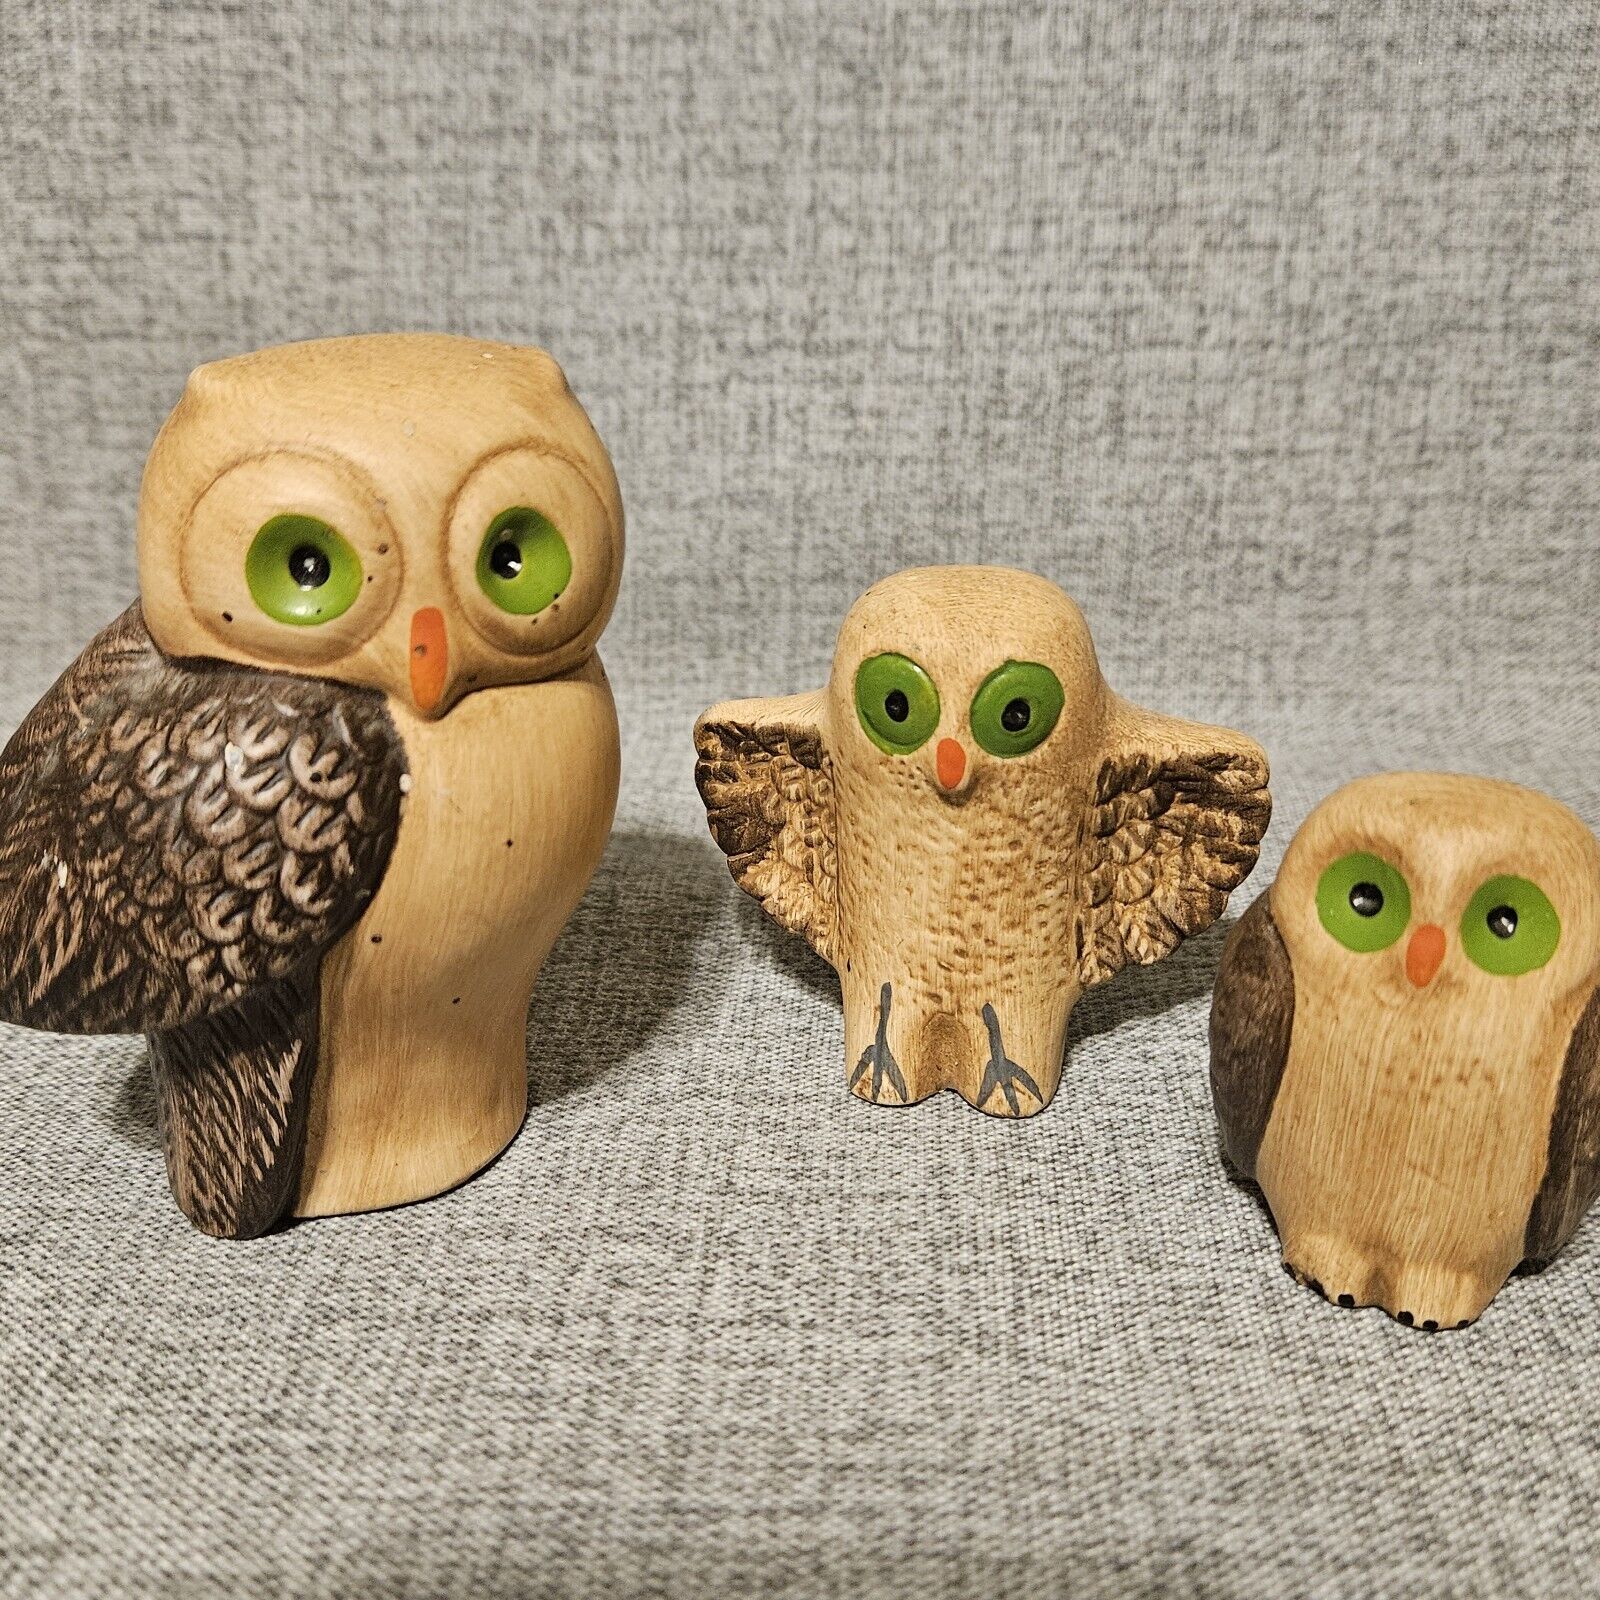 Vintage Owl Set of 3 MCM European Art Pottery Made in Portugal Green Eyes